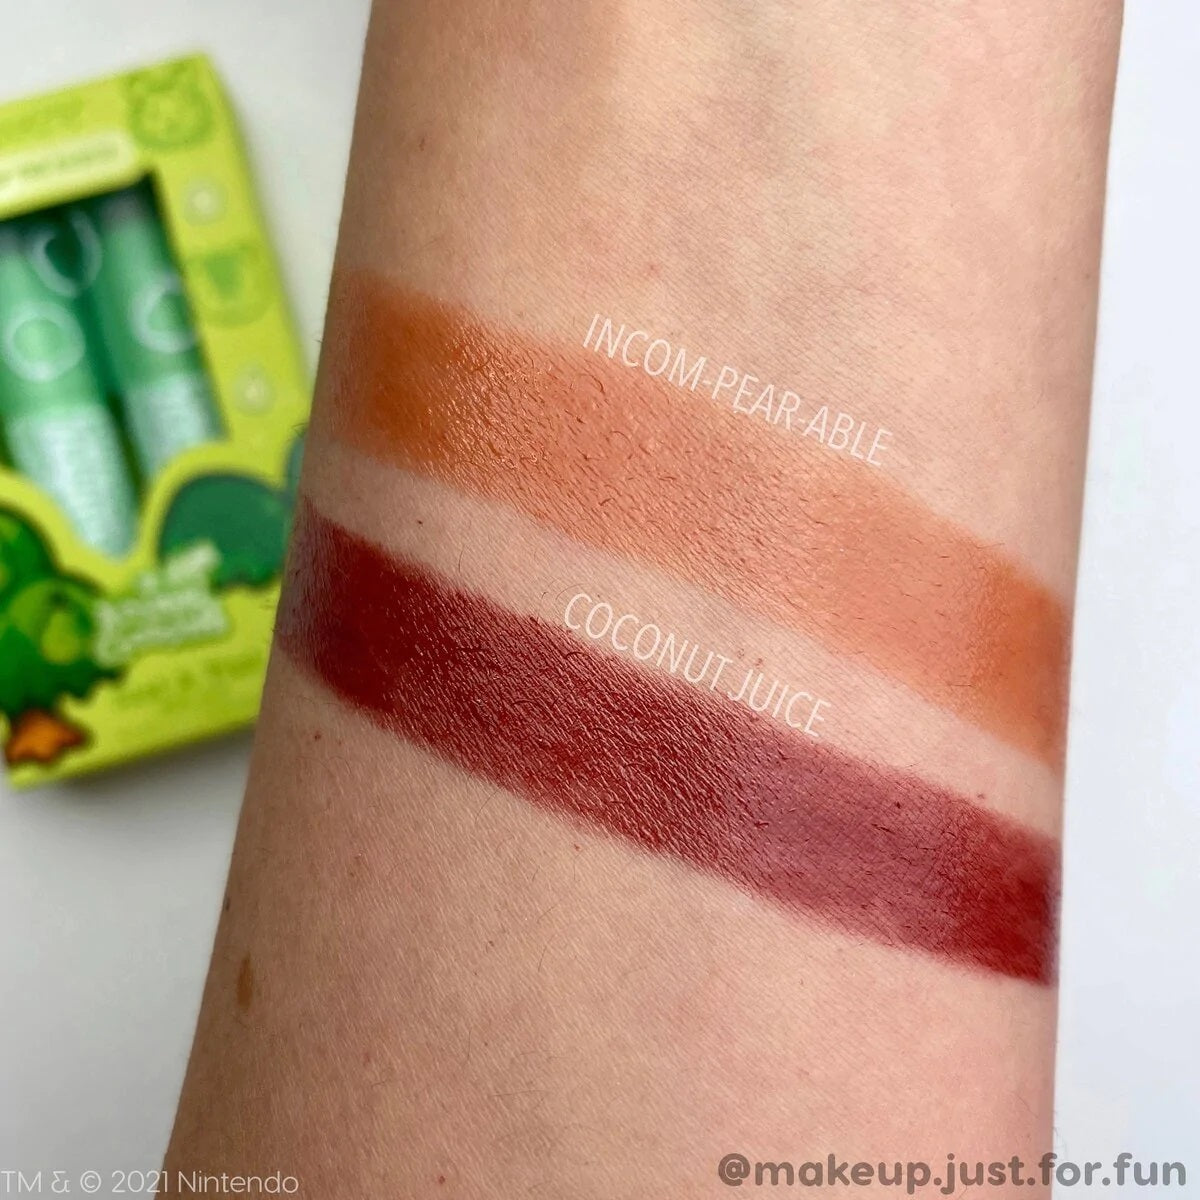 Colourpop x Animal Crossing - Pick of the Brunch Just a Tint Mini Duo